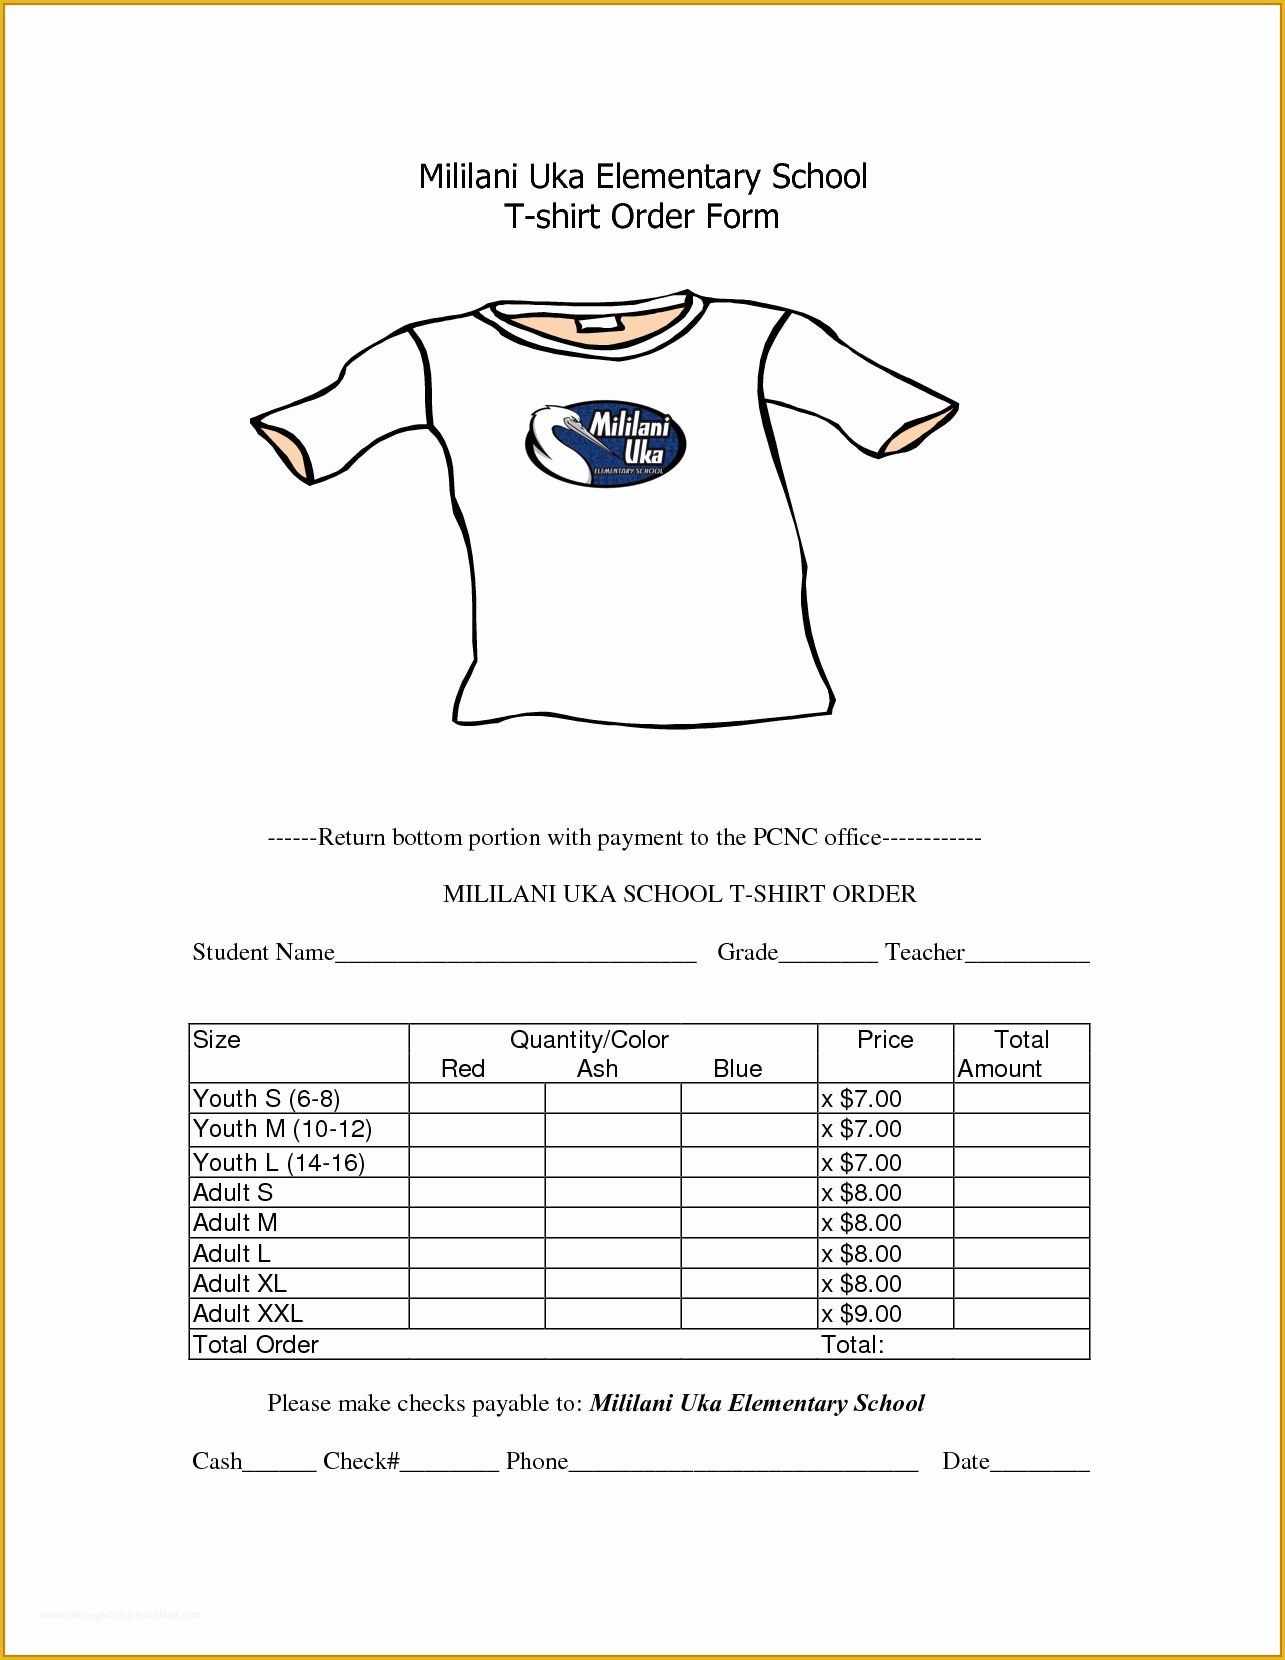 Merchandise order form Template Free Of 4 T Shirt order form Template Freereference Letters Words